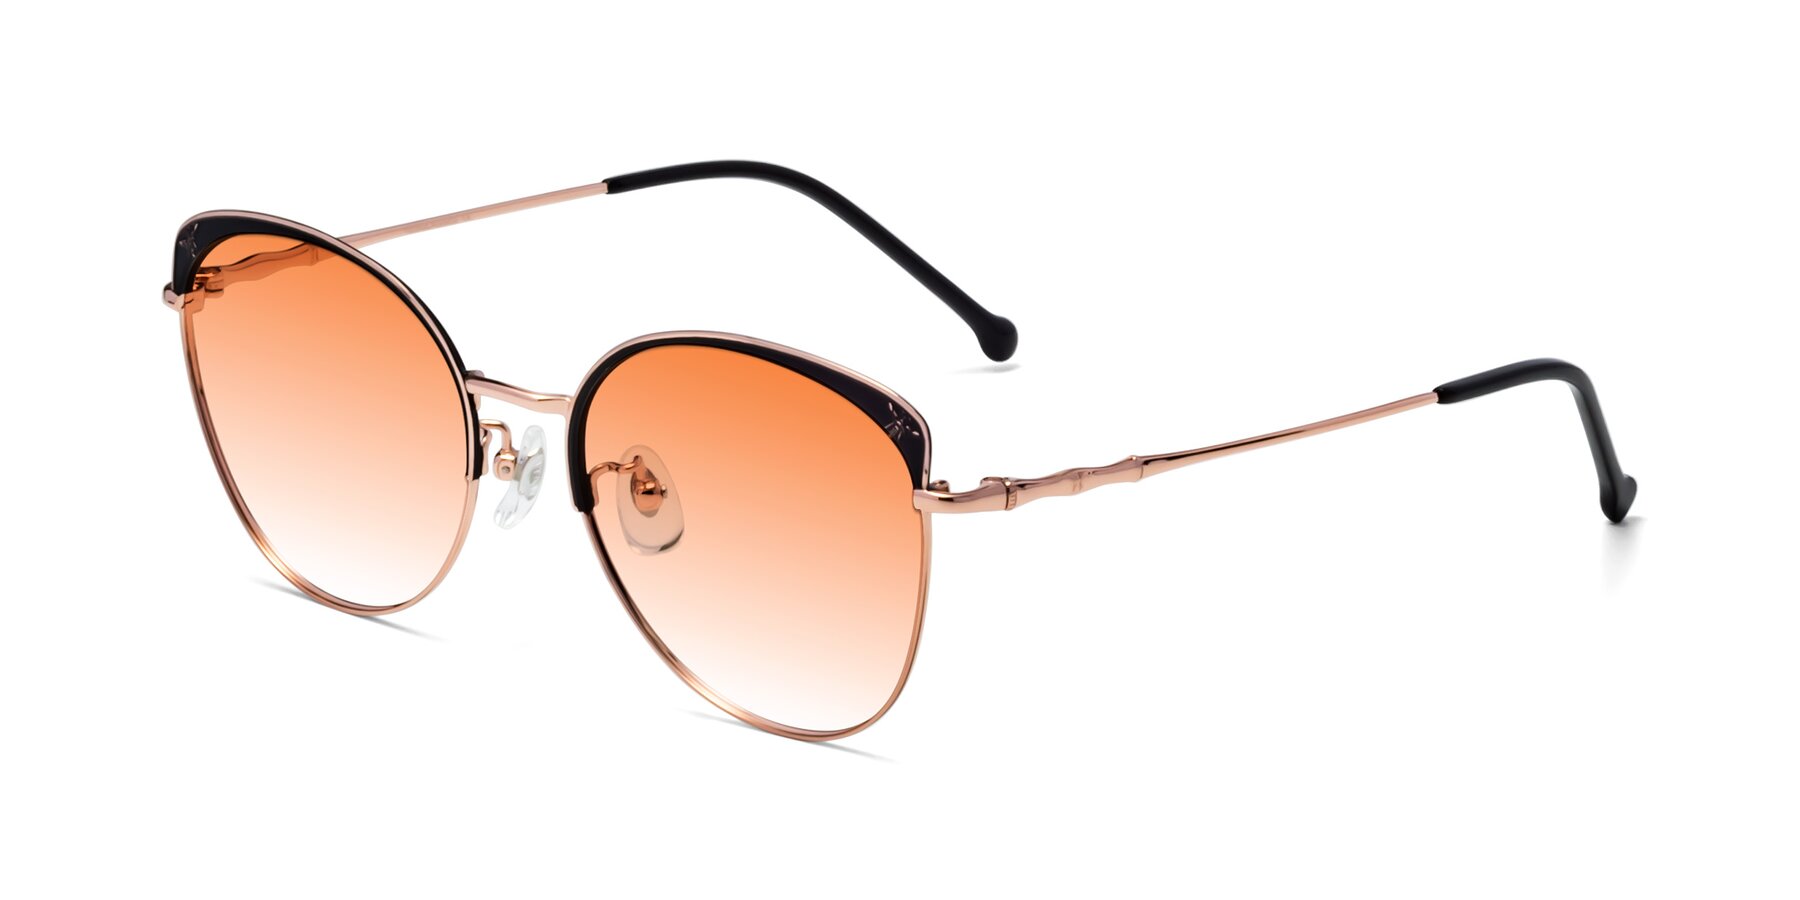 Angle of 18019 in Black-Rose Gold with Orange Gradient Lenses